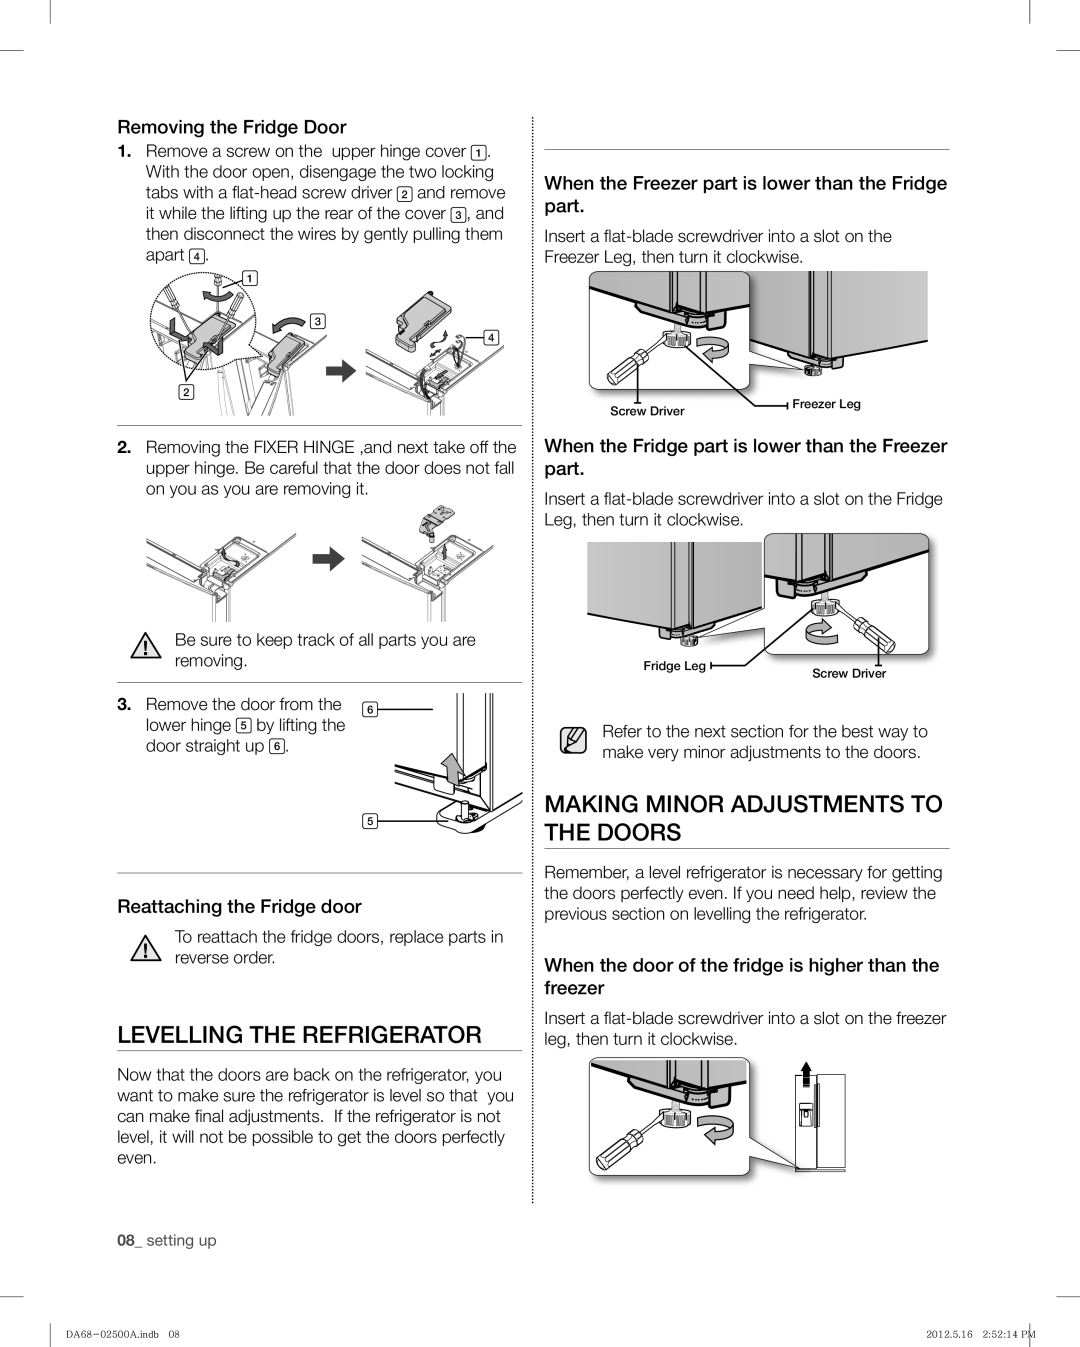 Samsung RSG307AABP, RSG307AAWP user manual Levelling the Refrigerator, Making Minor Adjustments to the Doors 